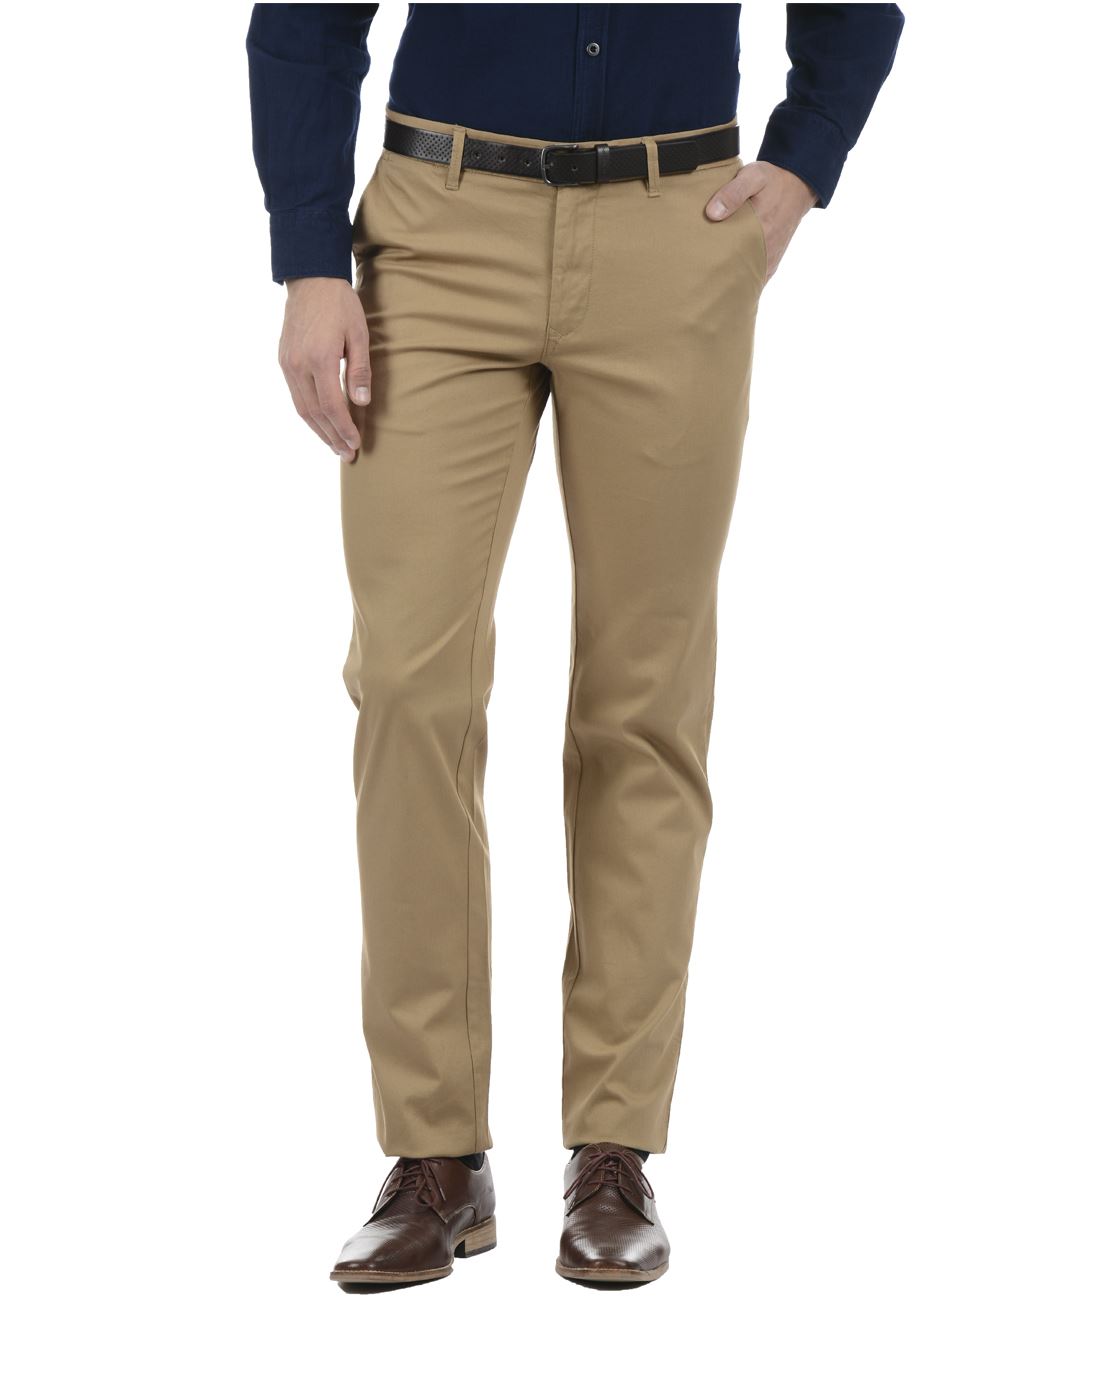 Indian Terrain ITBTR00052LT KHAKI Boys Lt Khaki Regular Fit Solids Trouser  S 89Y in Delhi at best price by Fashion Factory  Justdial